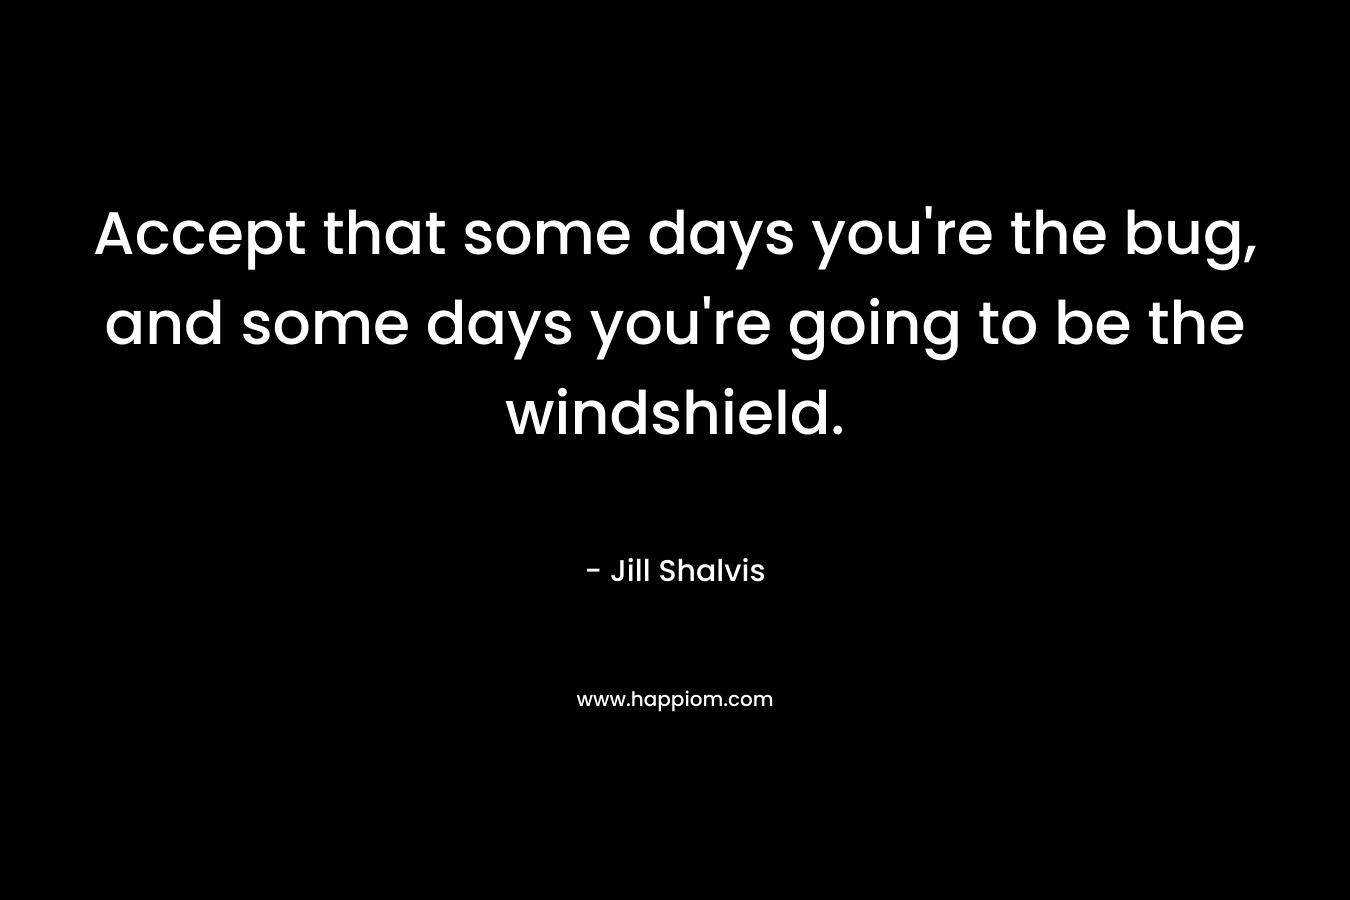 Accept that some days you're the bug, and some days you're going to be the windshield.